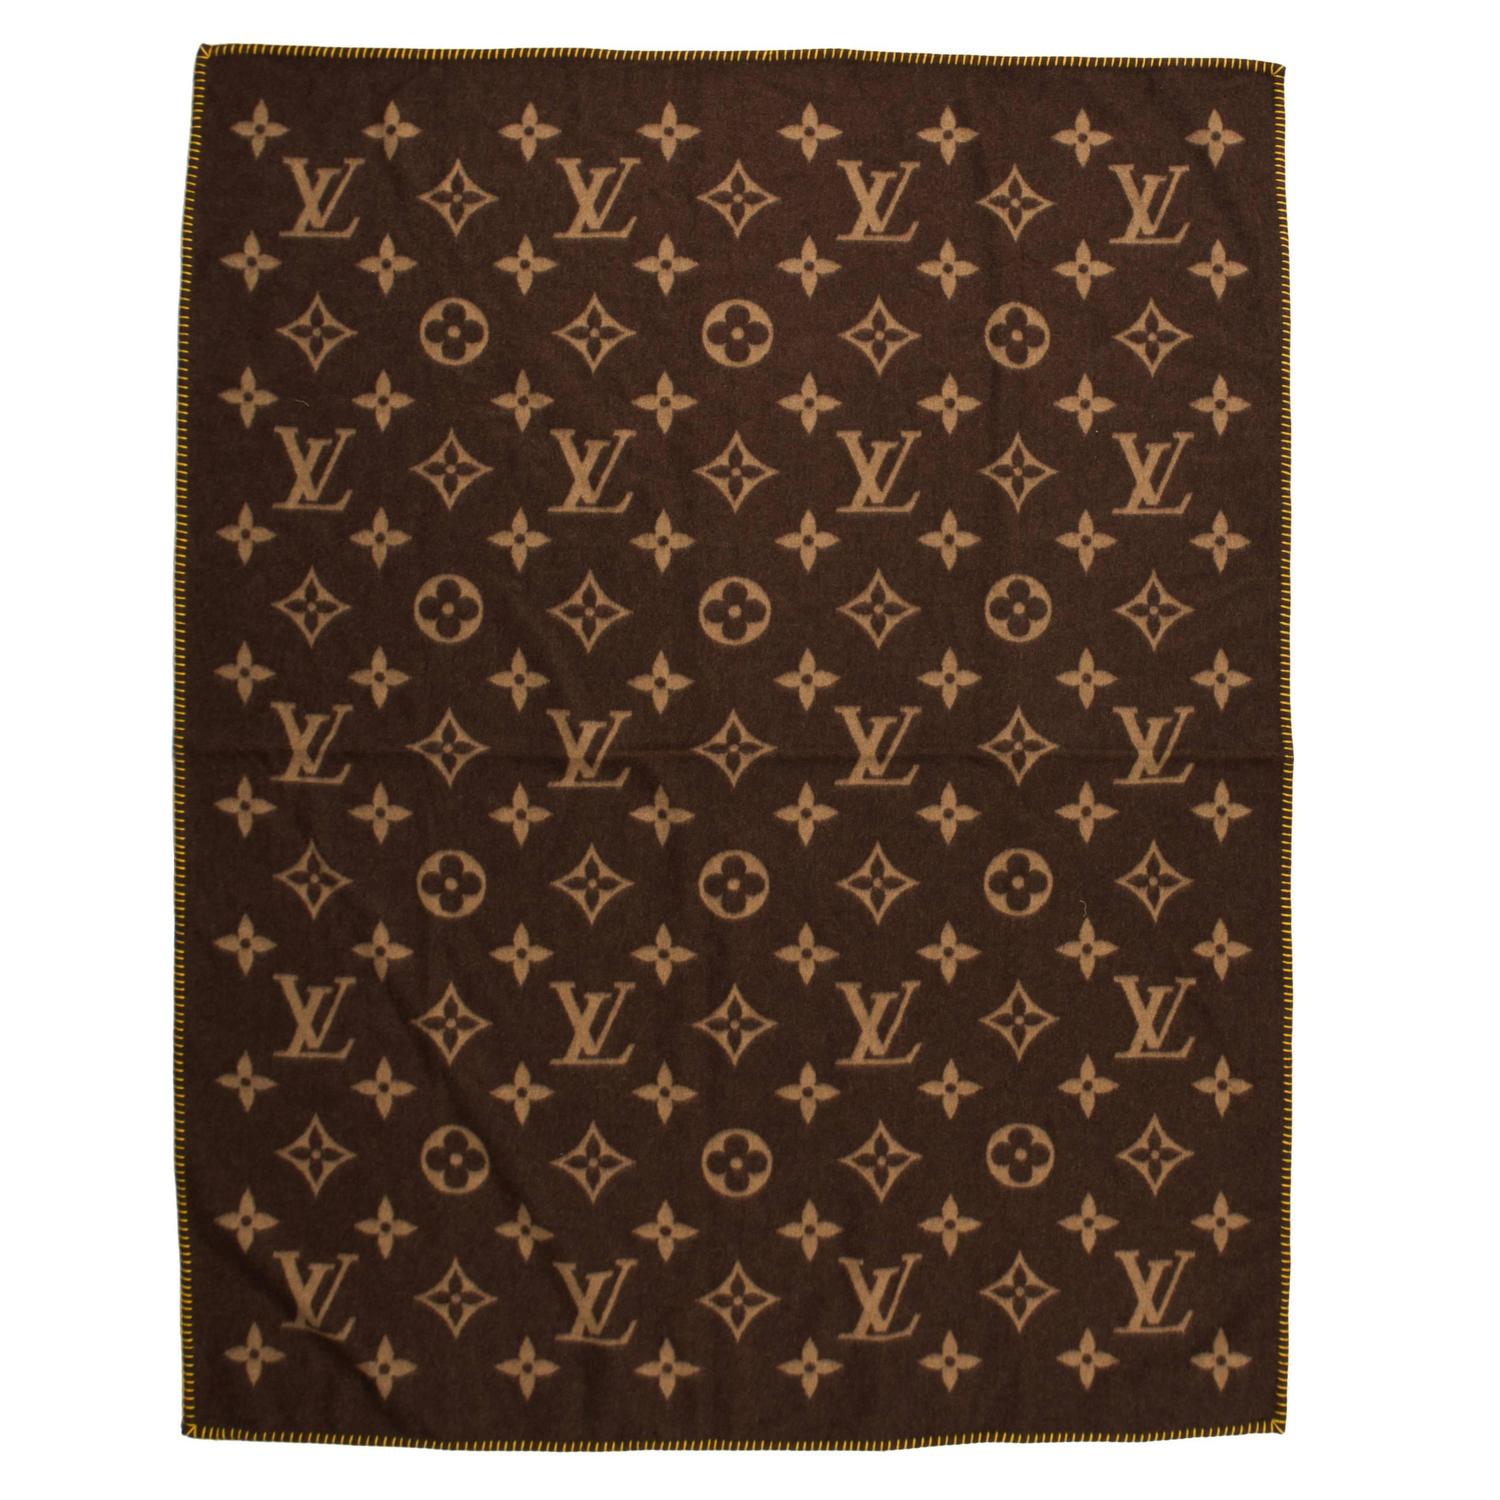 Louis Vuitton Inspired Throw Blankets by MadeWithLoveByLisaE